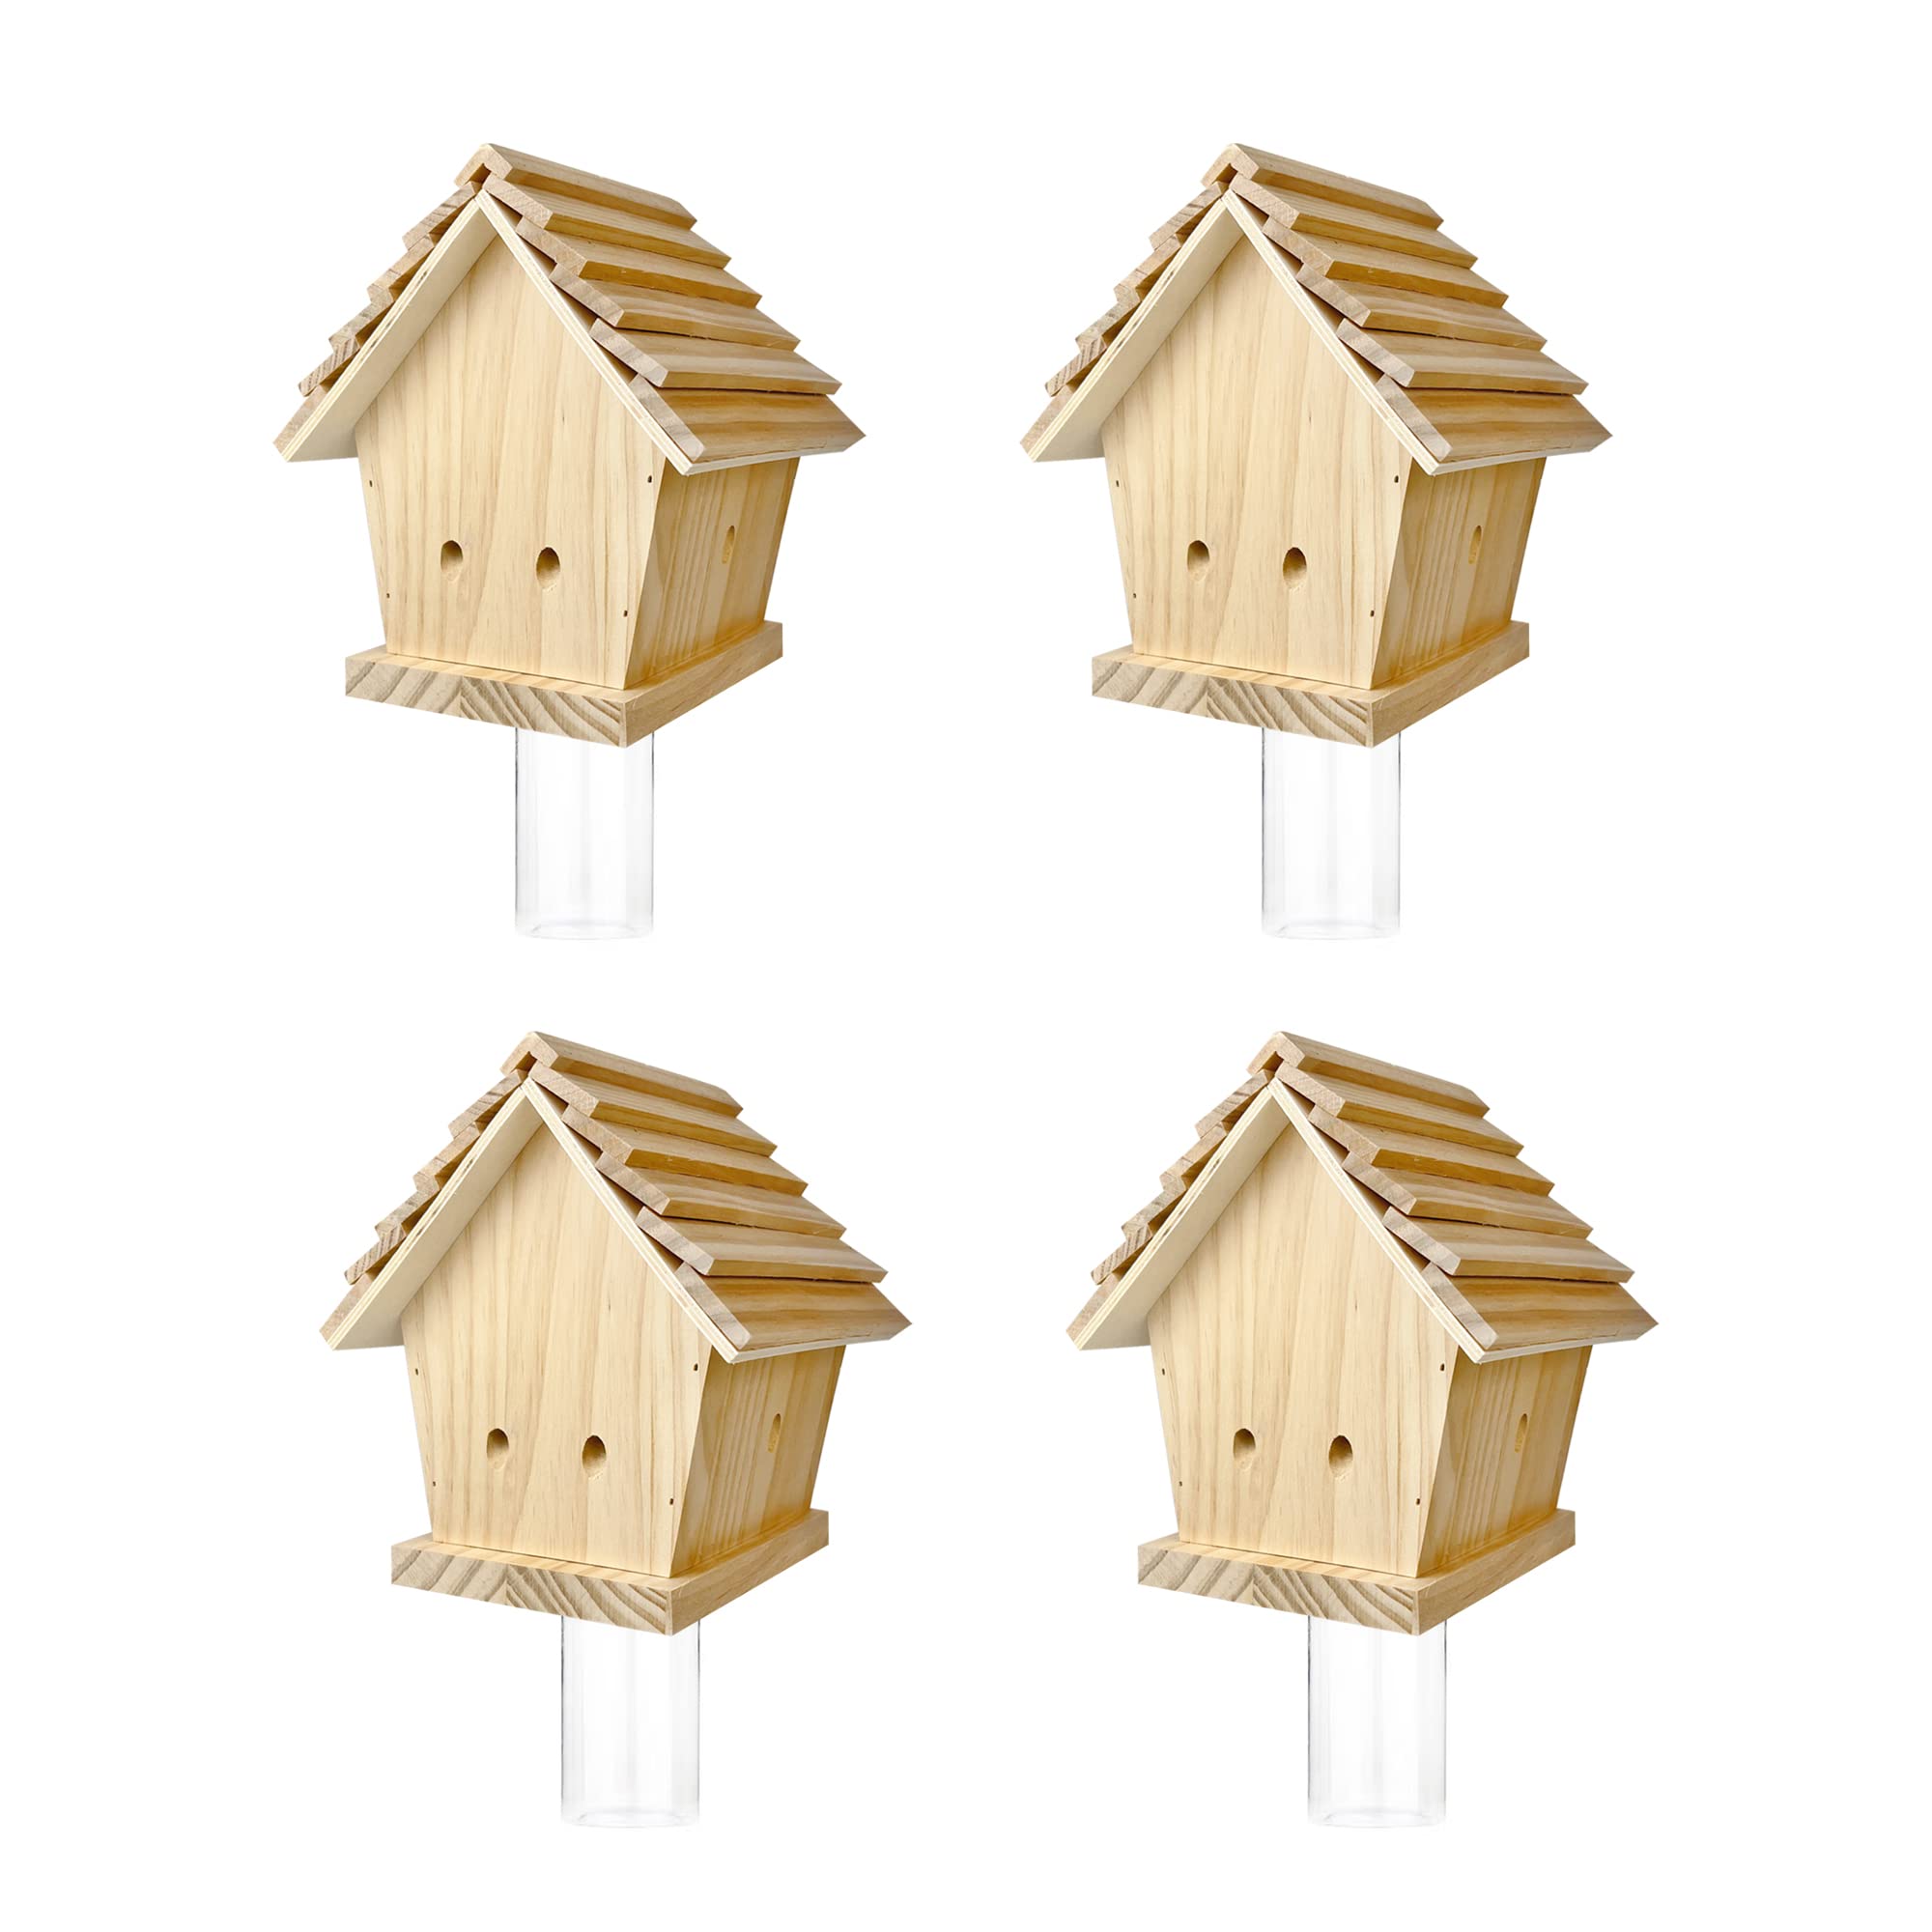 GAW Nature Wood Chalet Style Carpenter Bee Traps for Outdoors, 4 Pack Best Wooden Bee Trap for Outside